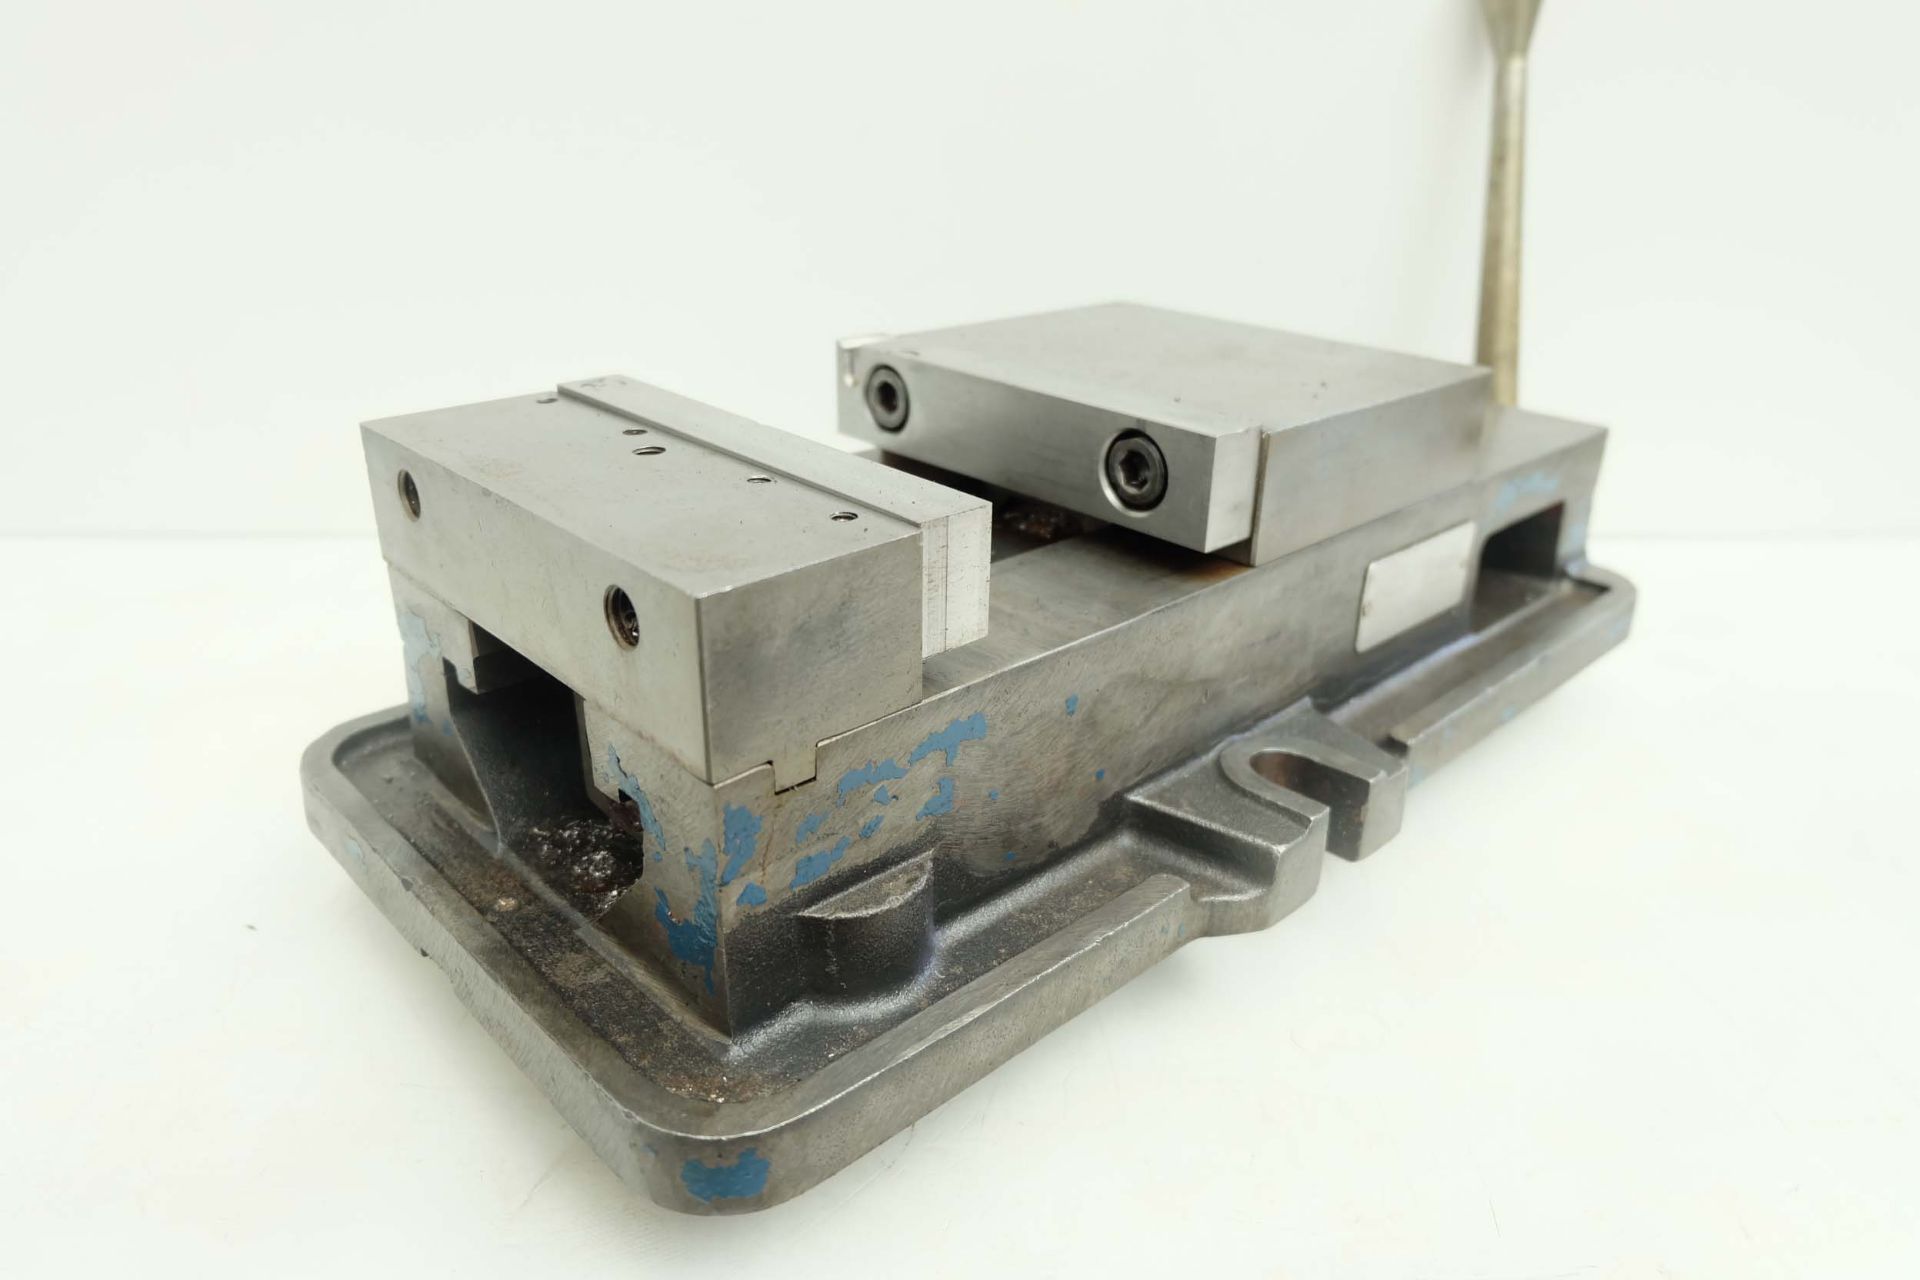 Autowell Model ATW 675A Machine Vice With Integrated Pull Down Mechanism. Width of Vice 6". - Image 5 of 6